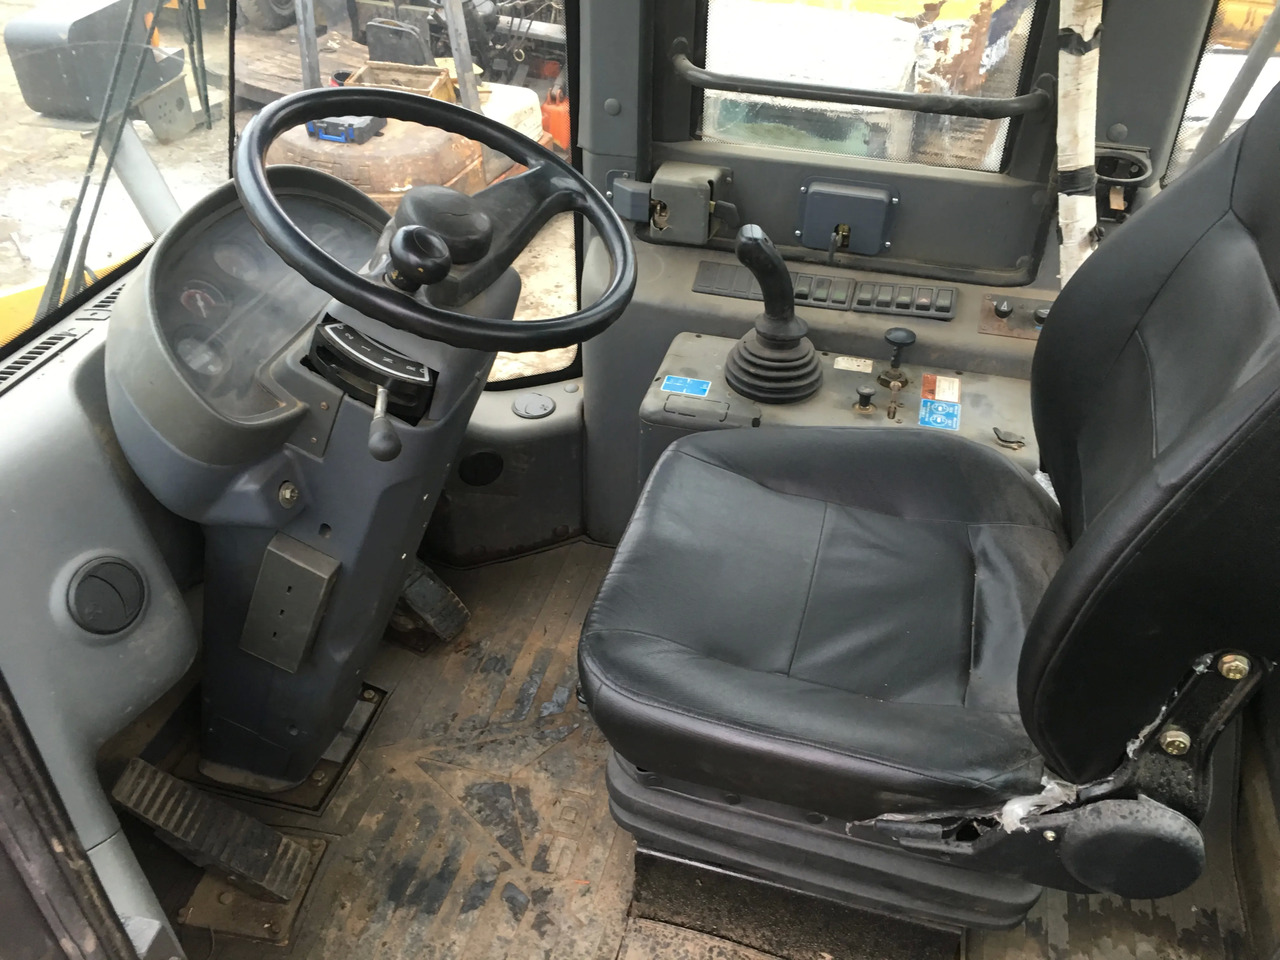 Wiellader Low Price Construction Used SDLG 956L Second Hand China Wheel Loaders for sale